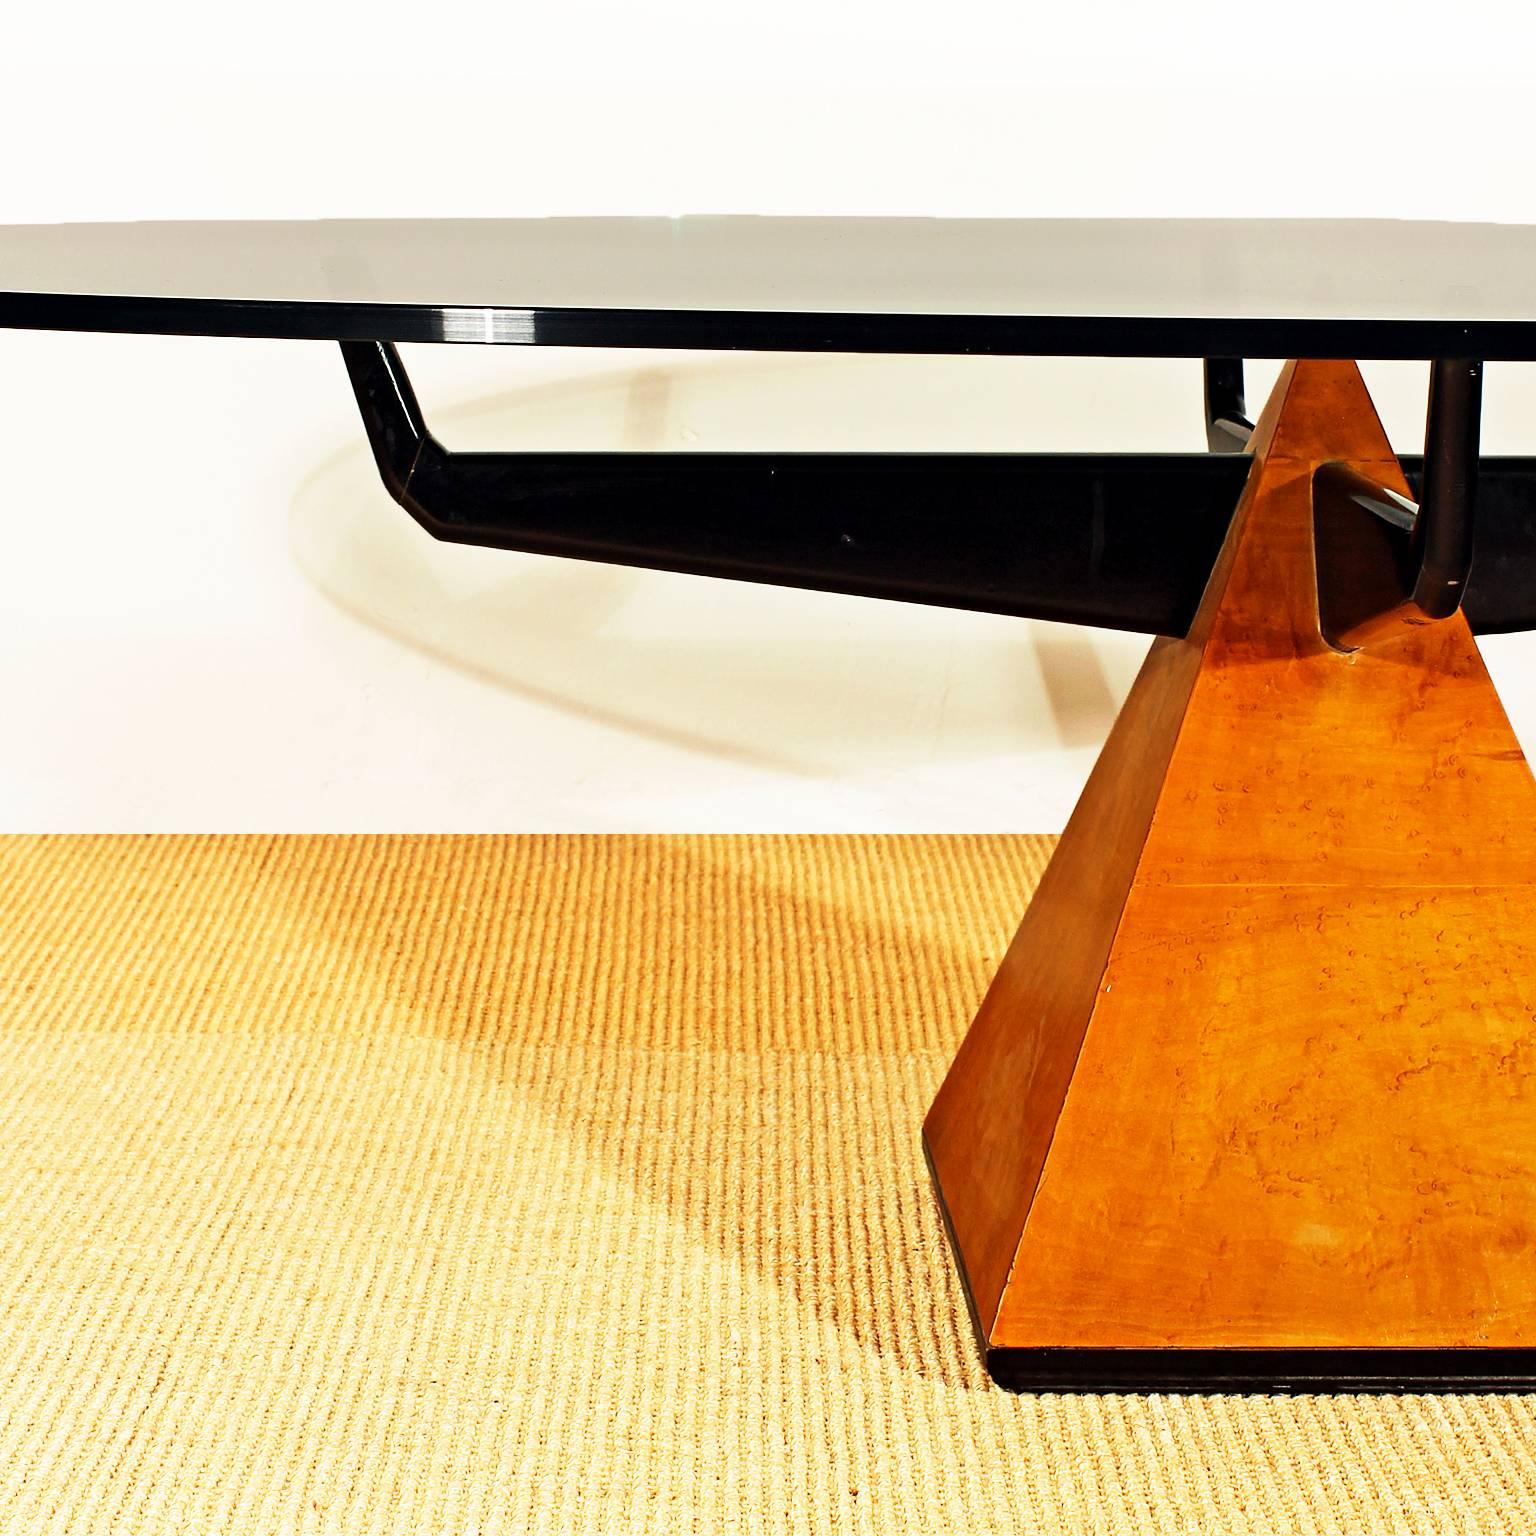 1950s Pyramidal Coffee Table, maple, lacquered wood, thick glass - Italy 1